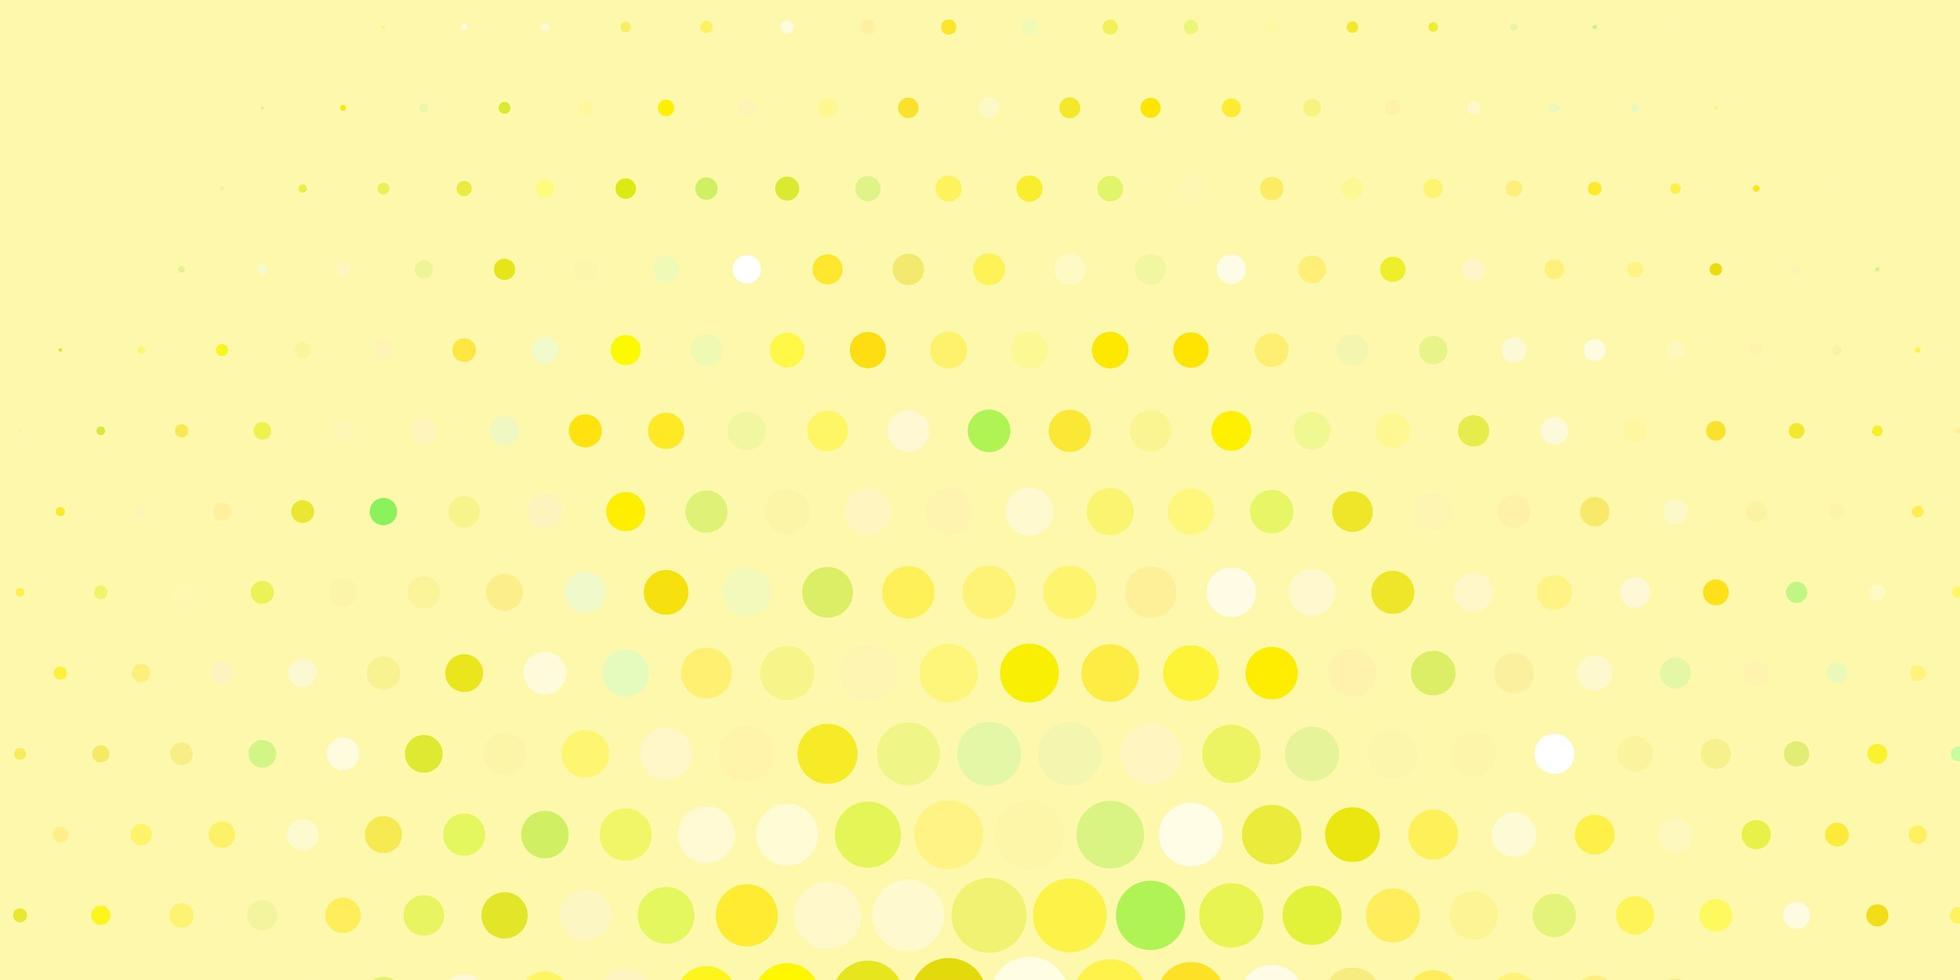 Light Green Yellow vector background with spots Abstract decorative design in gradient style with bubbles Pattern for booklets leaflets